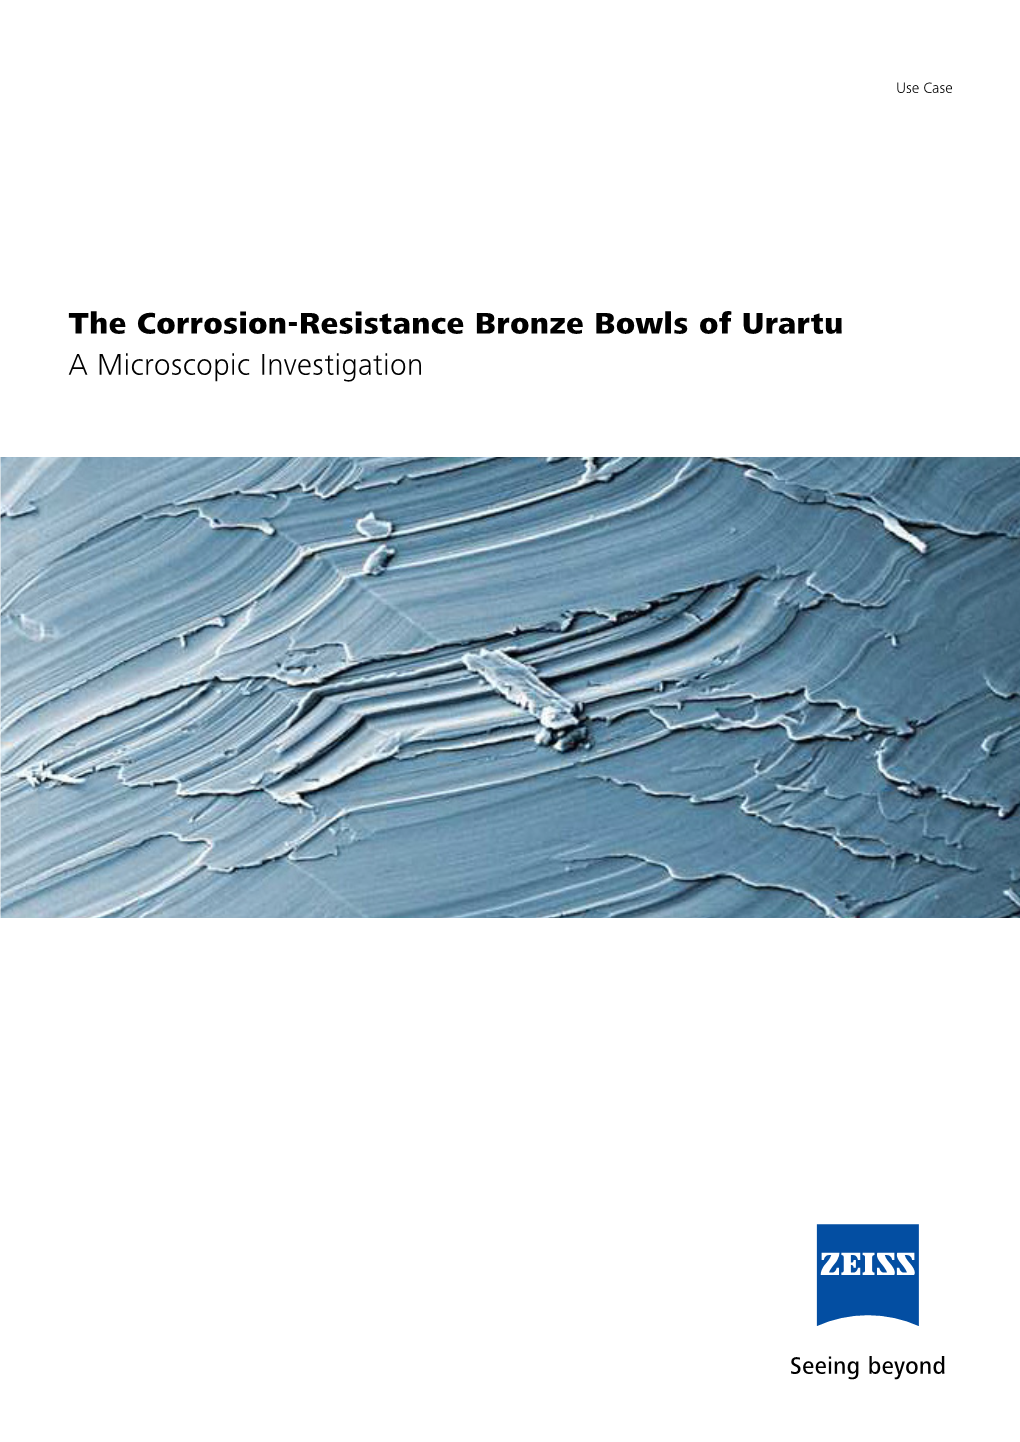 The Corrosion-Resistance Bronze Bowls of Urartu a Microscopic